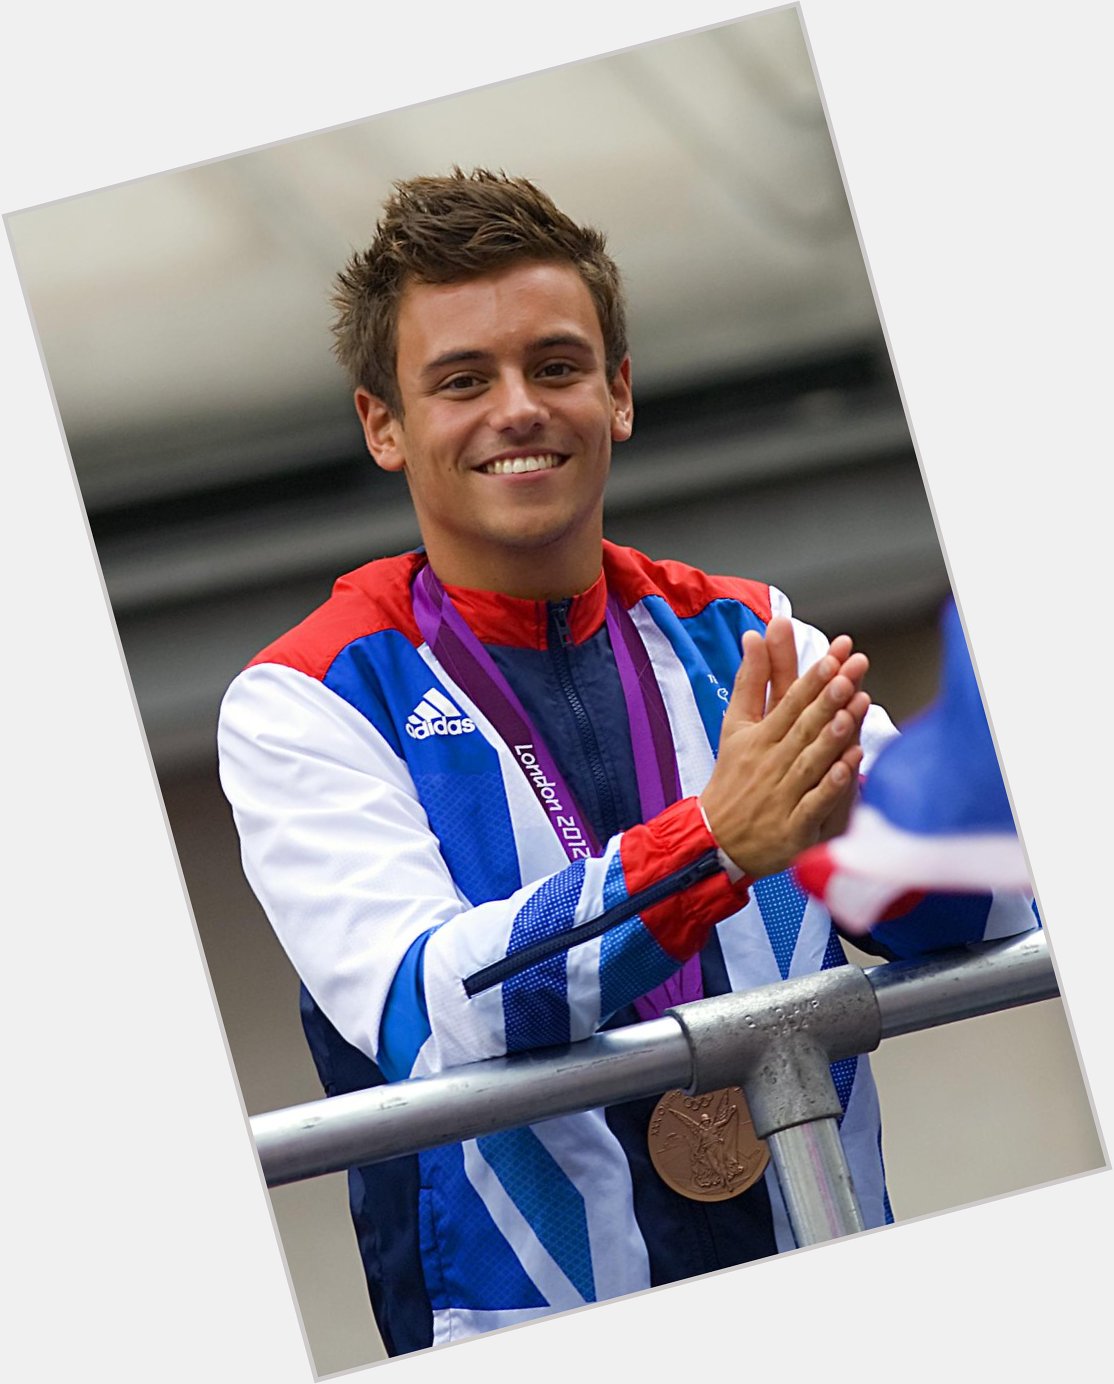 Please join me next Thursday in wishing openly gay and British Olympian Tom Daley a happy 21st birthday! 